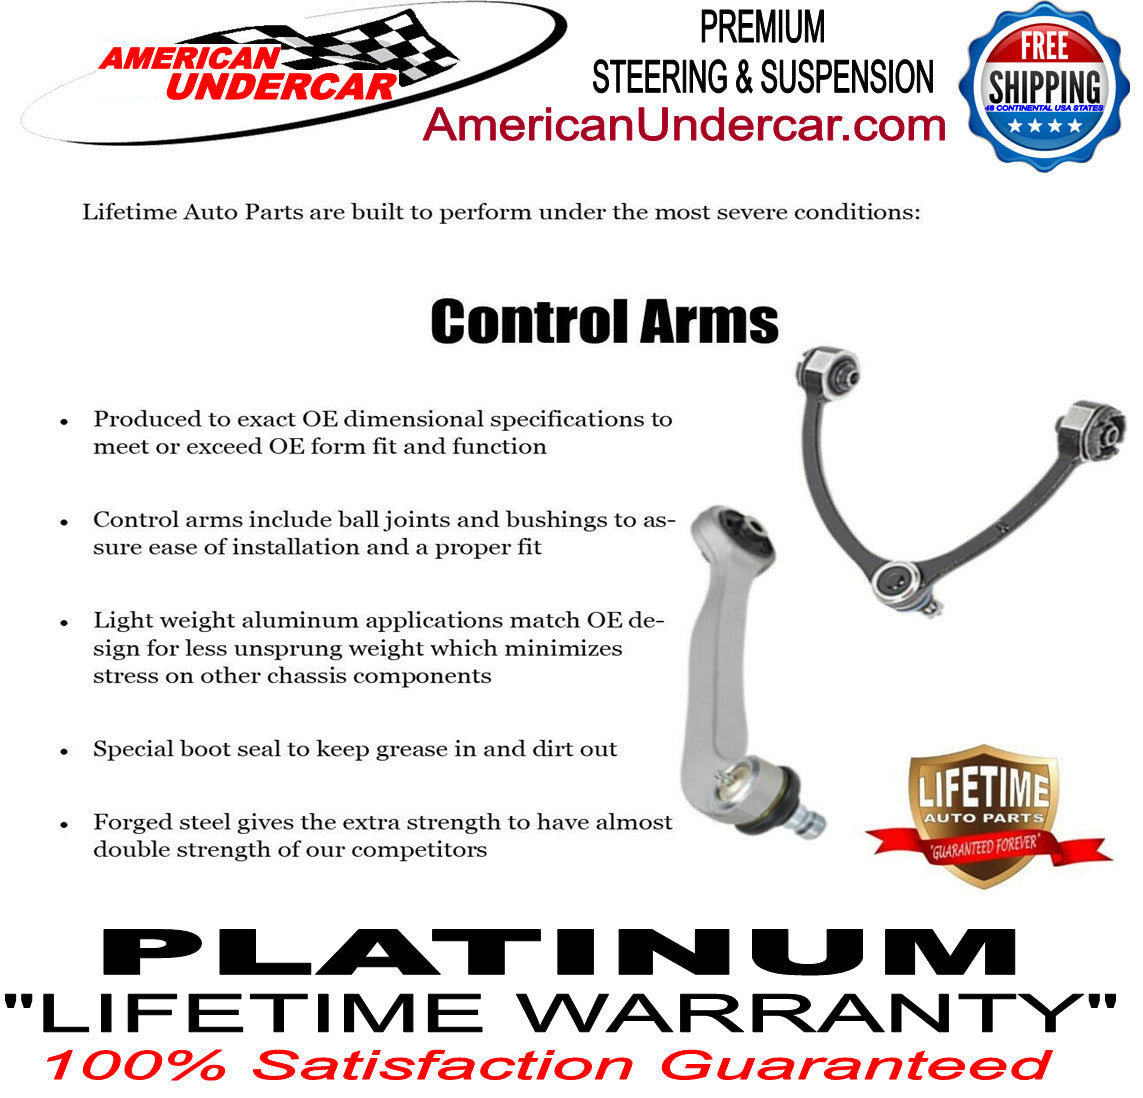 Lifetime Drag Link Tie Rod Sleeves Steering Kit for 2011-2016 Ford F250, F350 Super Duty 4x4 SRW